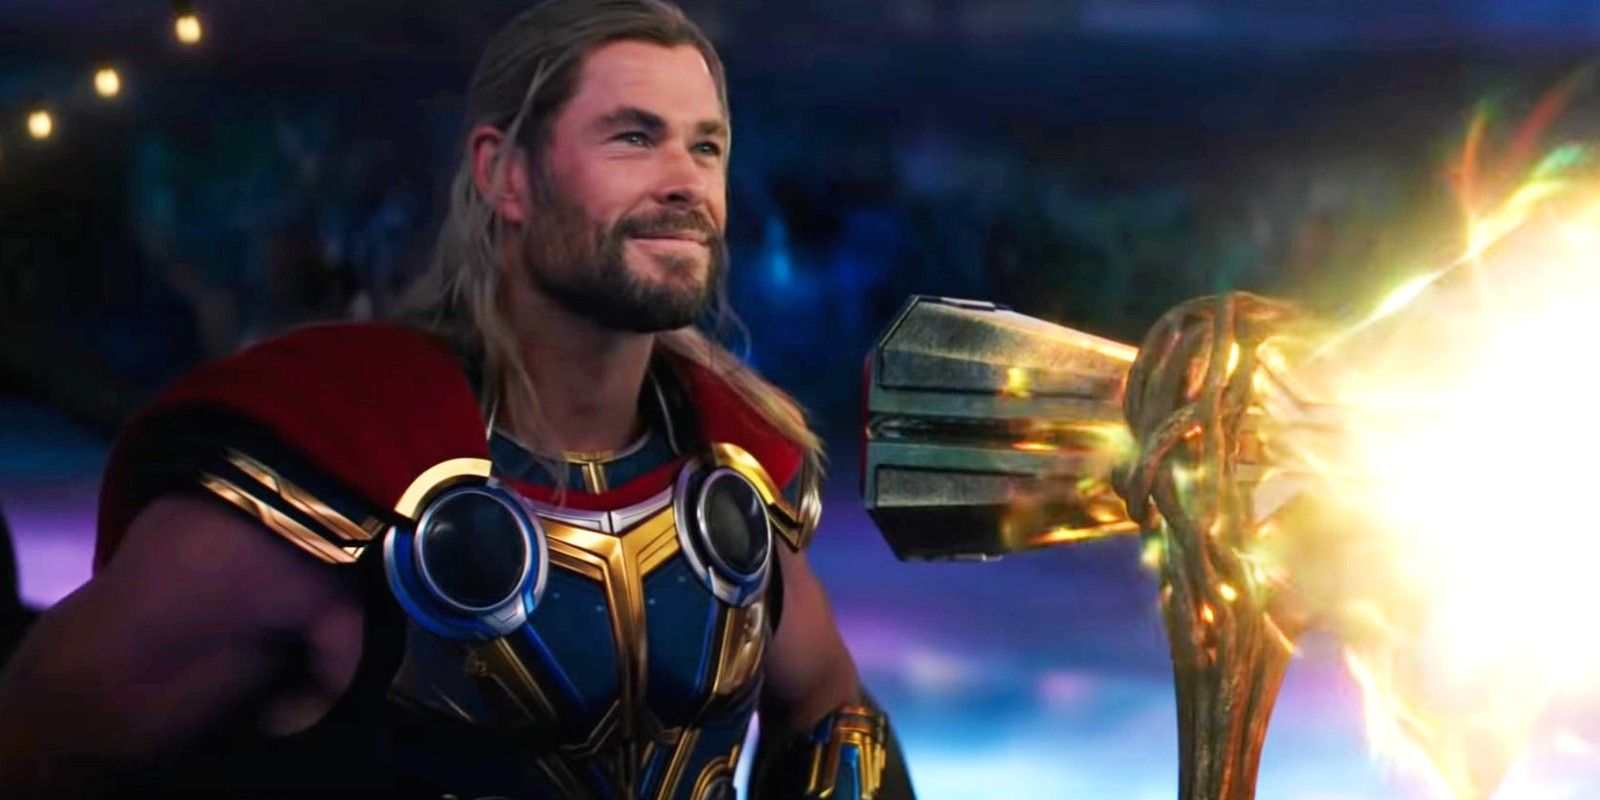 Chris Hemsworth as Thor with Stormbreaker in Love and Thunder